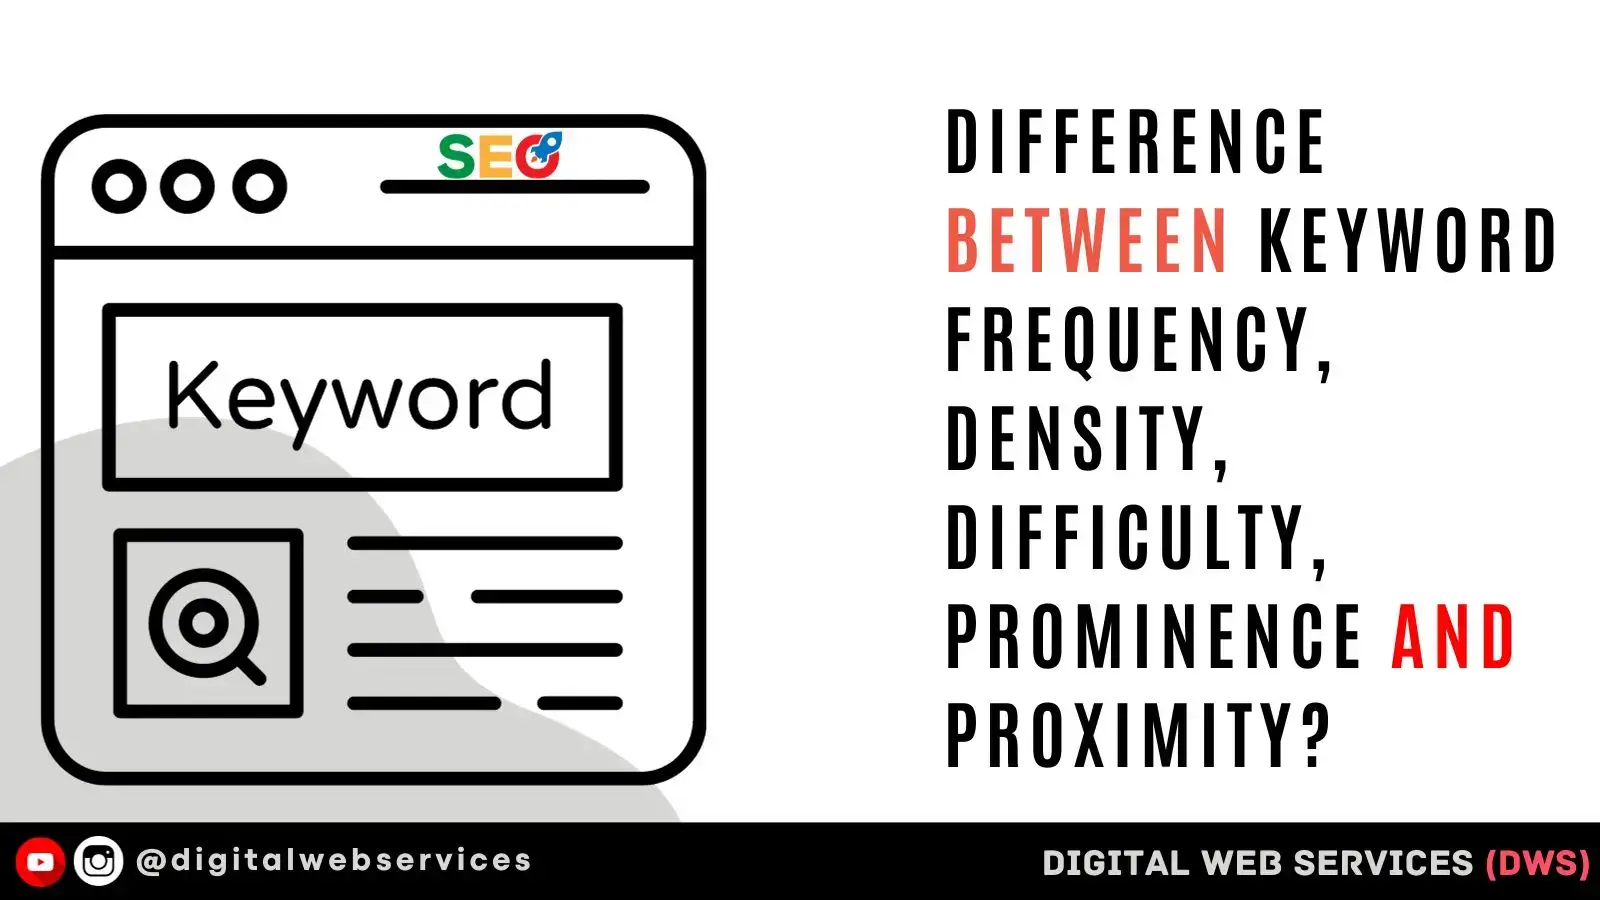 Difference Between Keyword Frequency, Density, Difficulty, Prominence and Proximity_